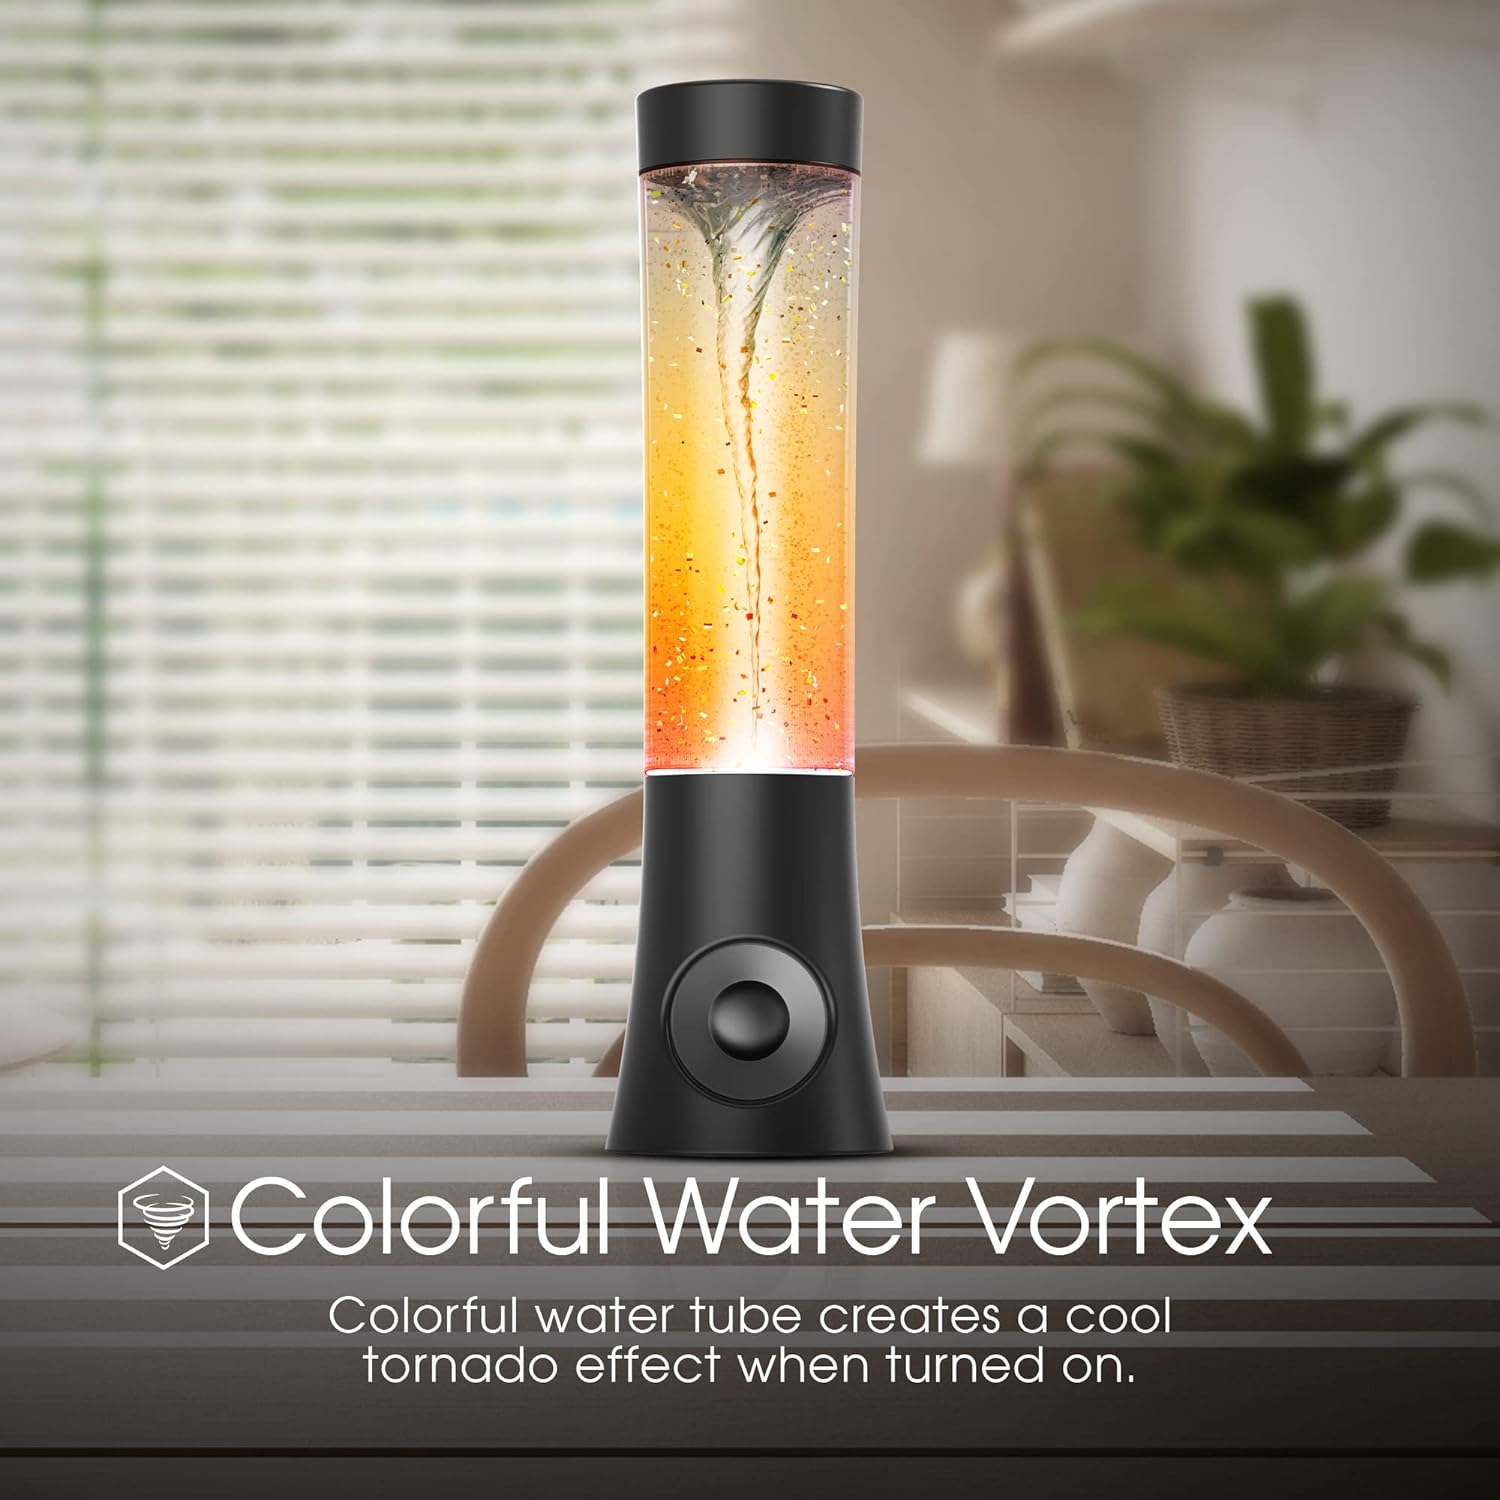 ART+SOUND Vortex Tornado TWS Bluetooth Speaker, 7 LED Light Show, Portable Speaker, Tornado Feature, Connect 2 Speakers at a Time, Bass Boosted, Home and Outdoor Speaker, Rechargeable Speaker